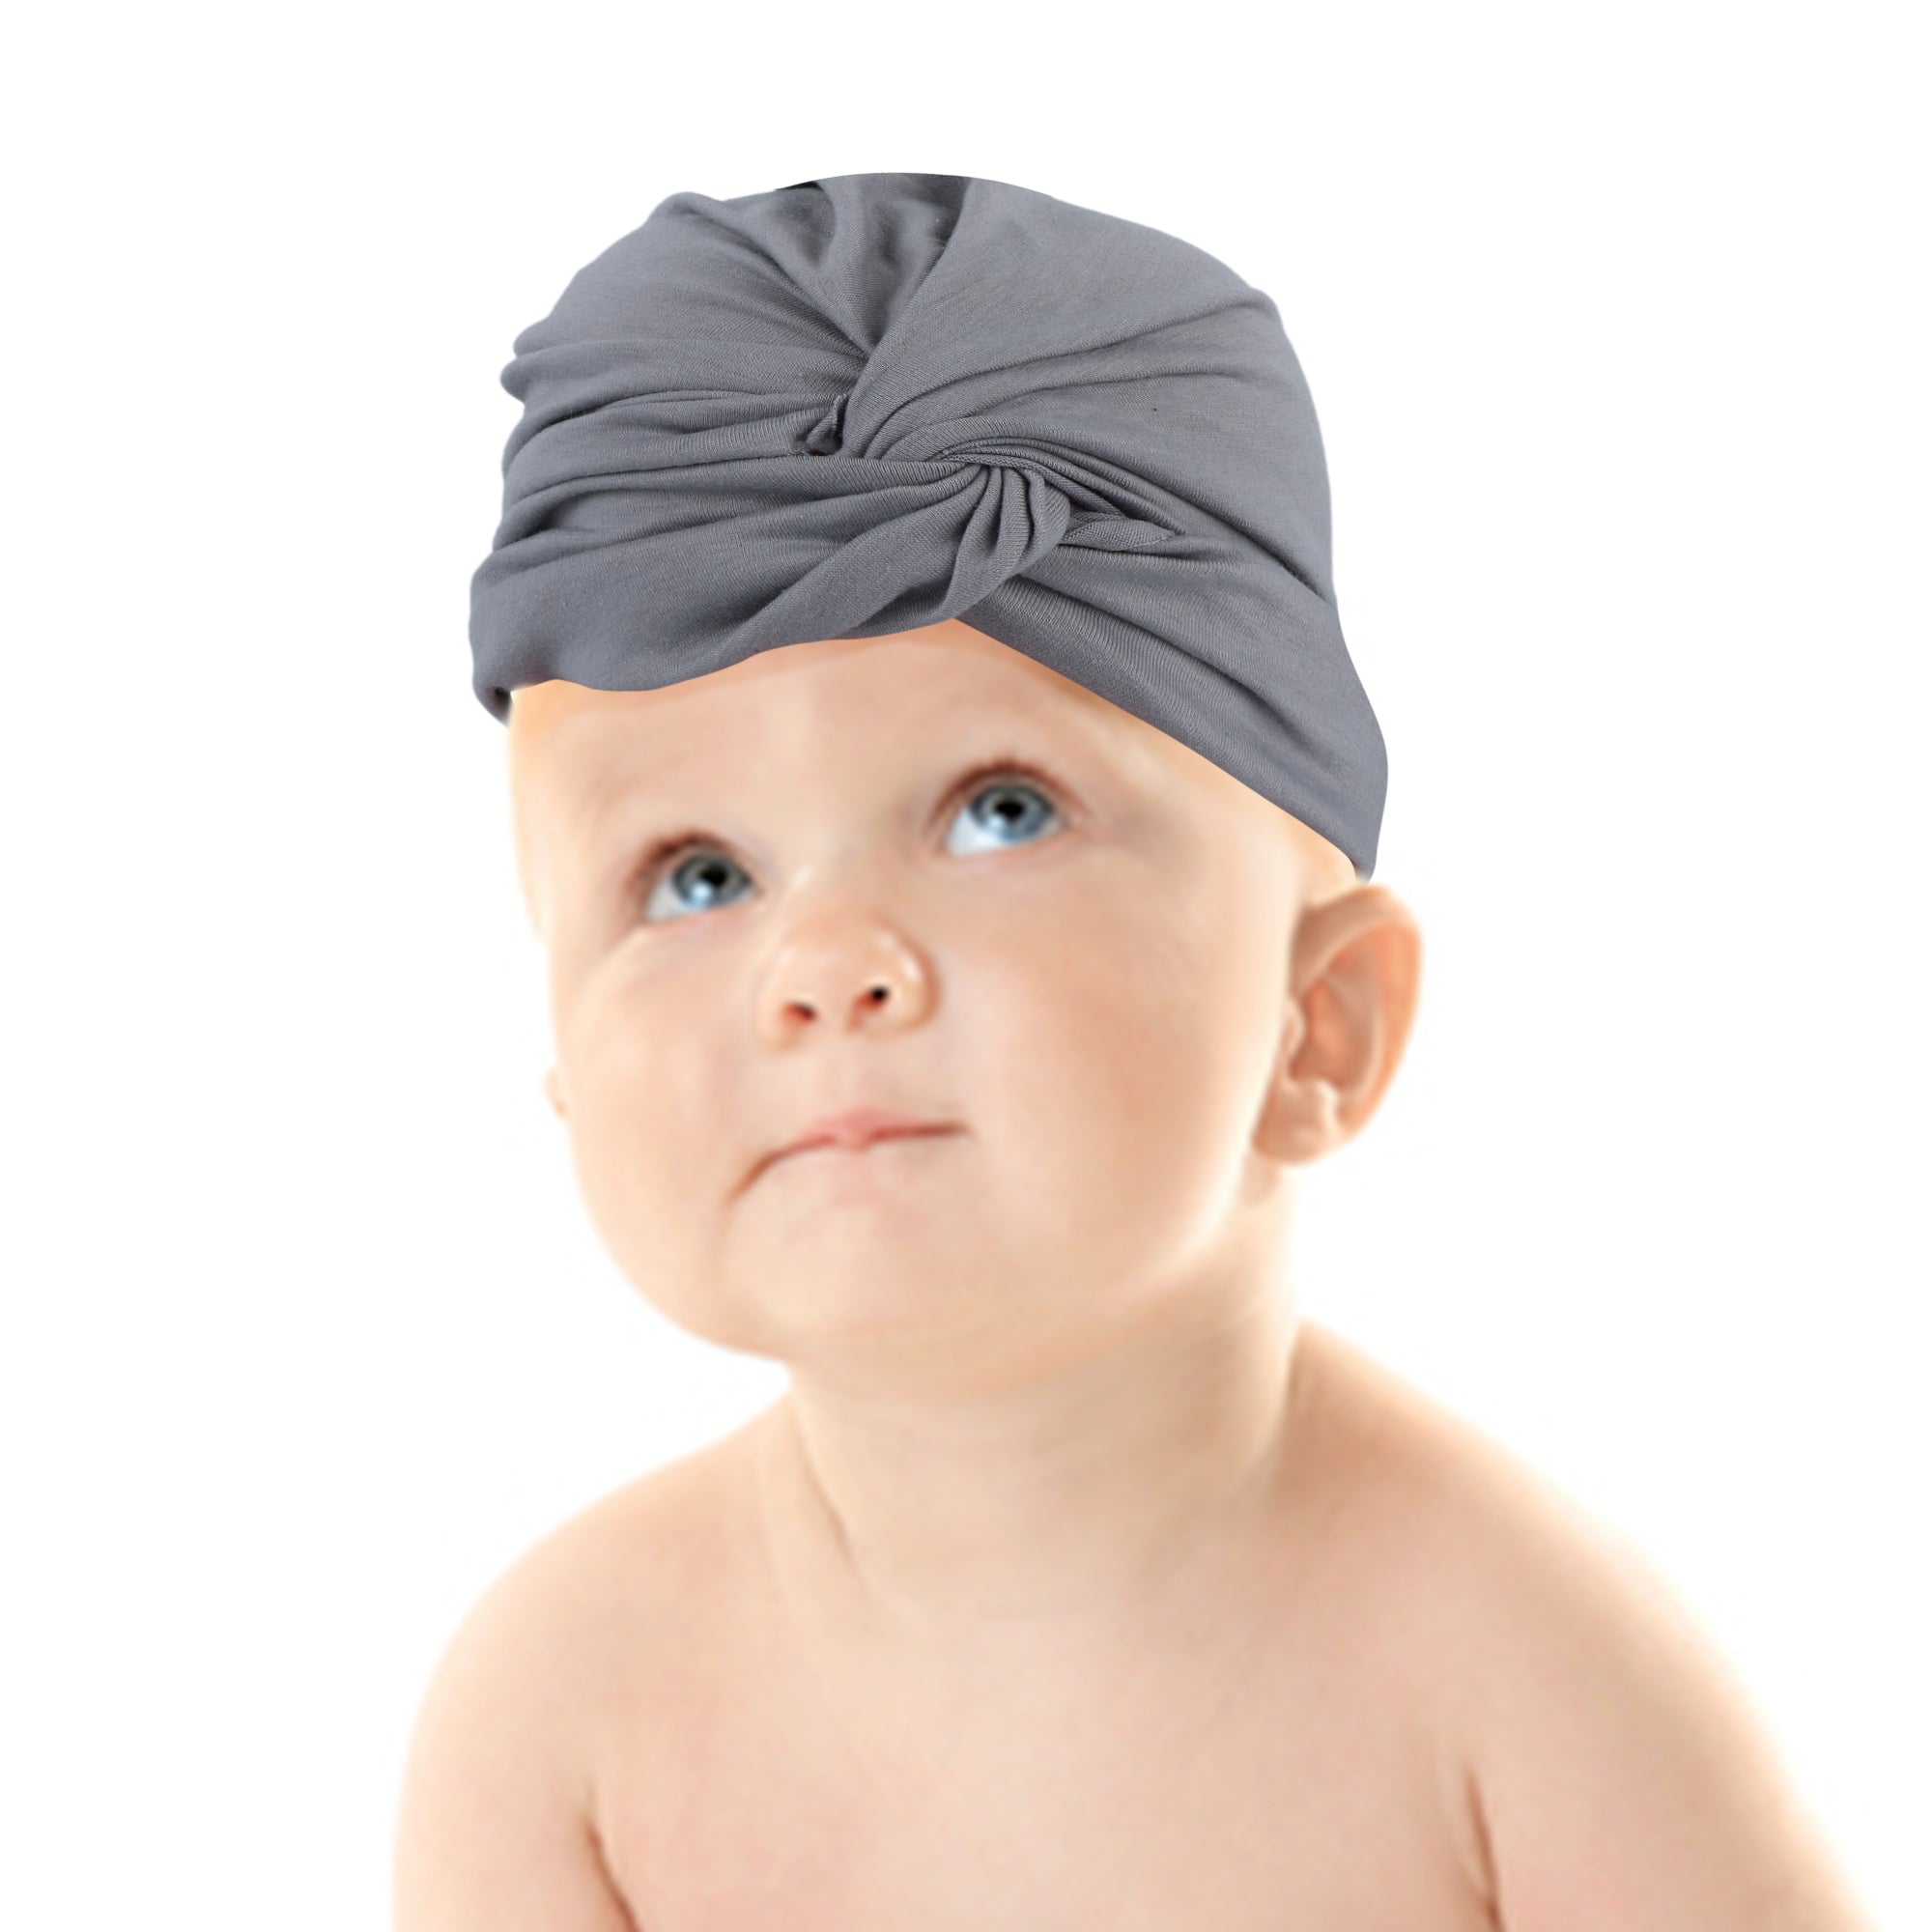 Cute Knotted Turban Cap Infant Beanie - Grey - Baby Moo